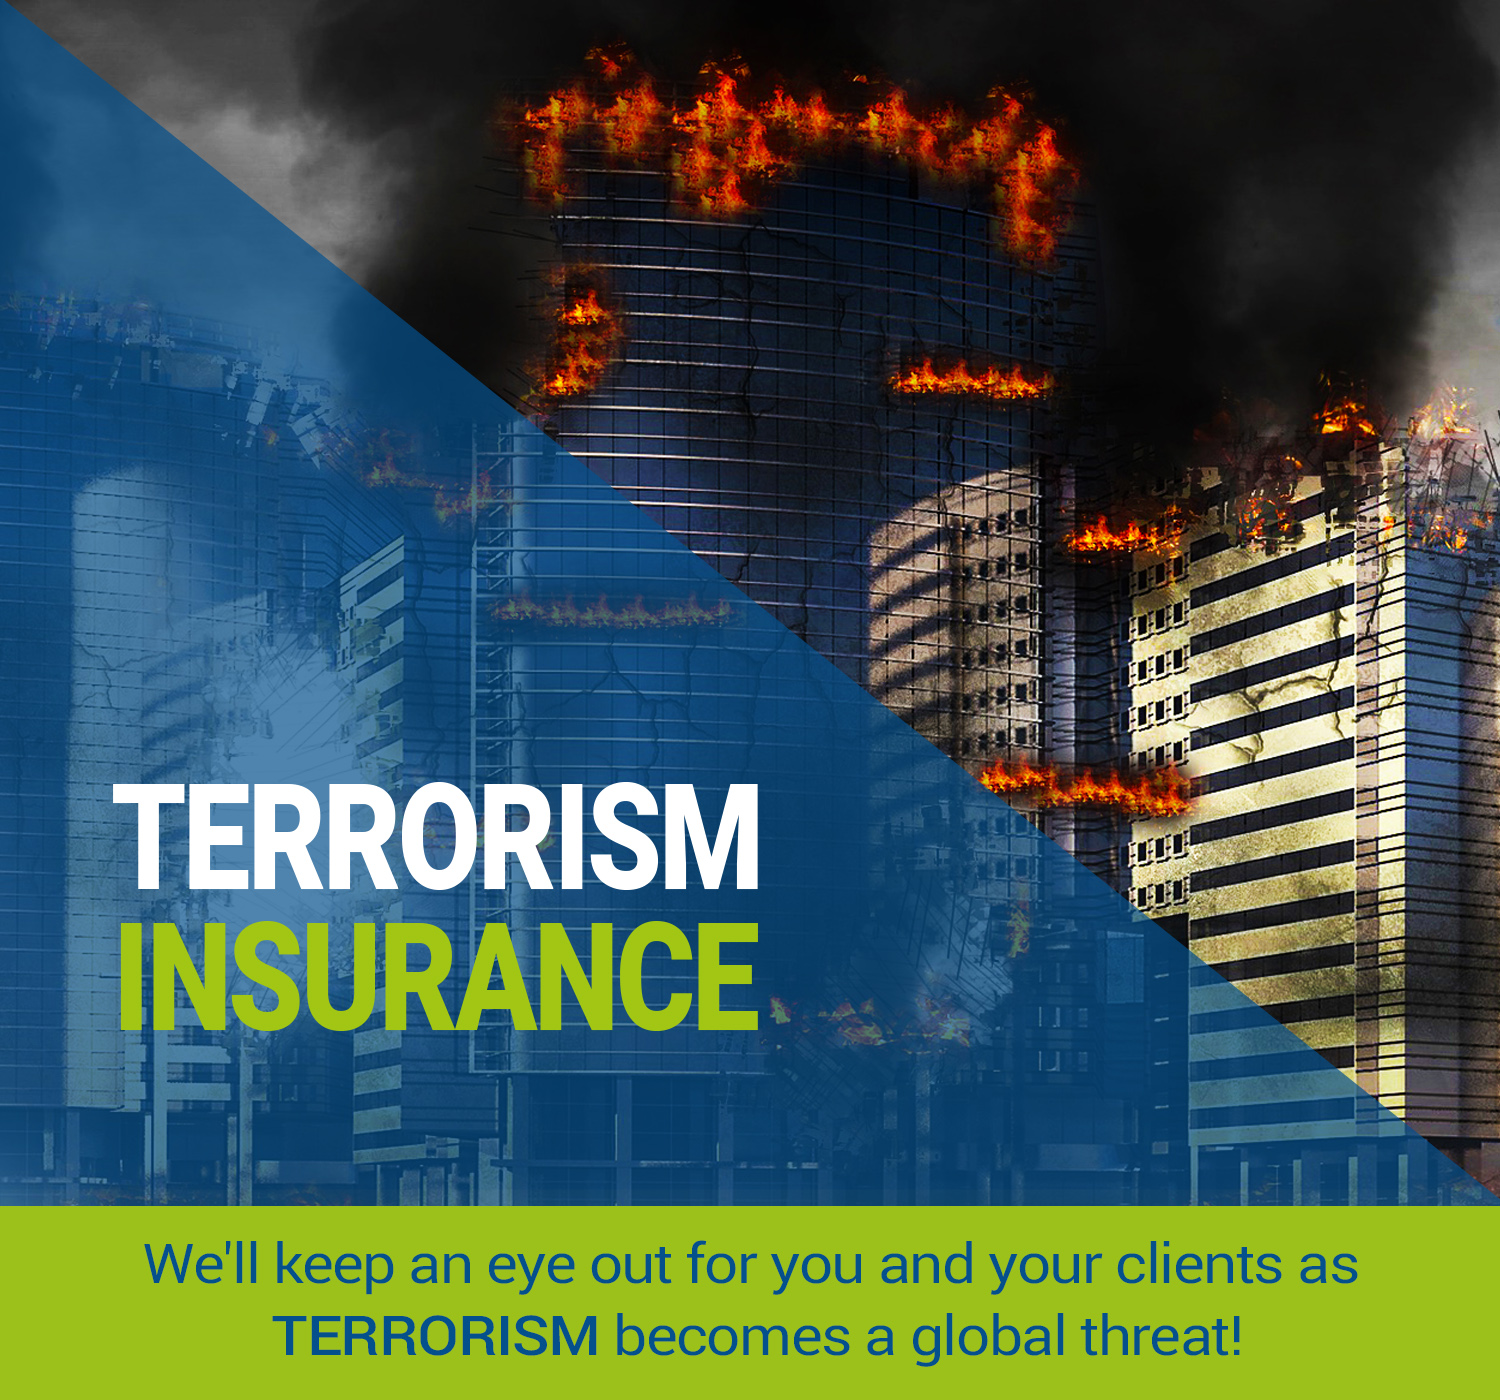 Do you need Terrorism Insurance? – Citynet can help with that. - Citynet